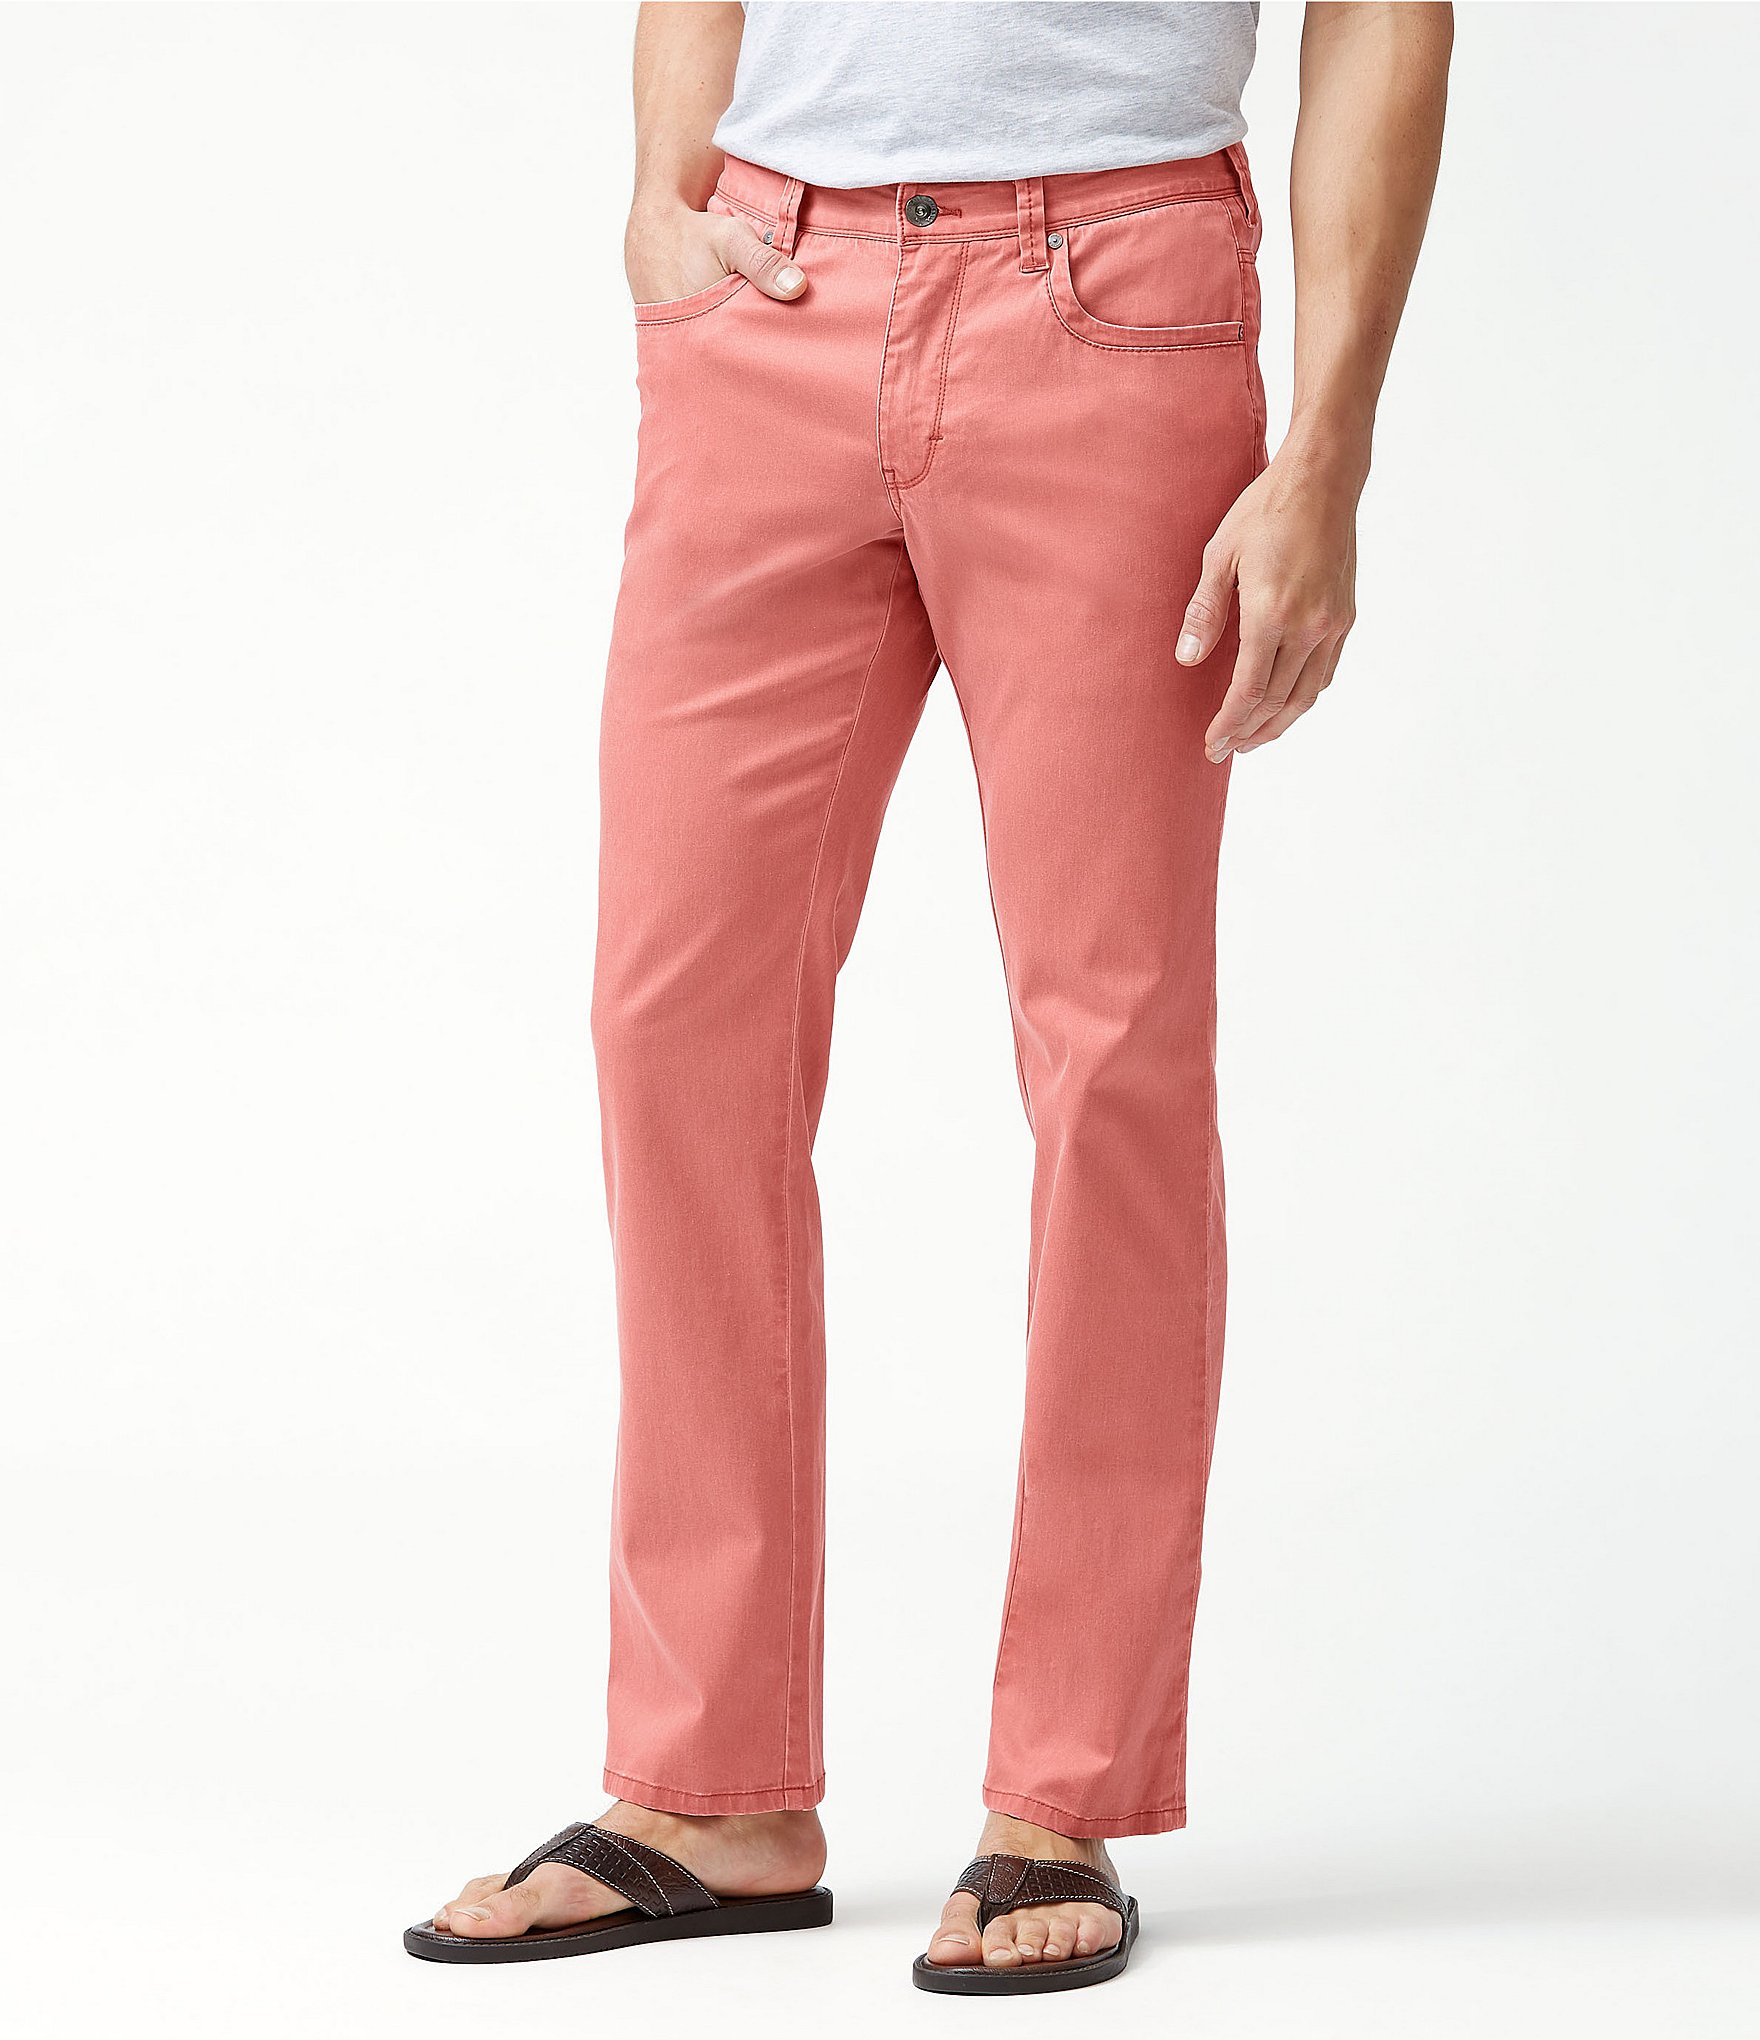 Men's Red Jeans